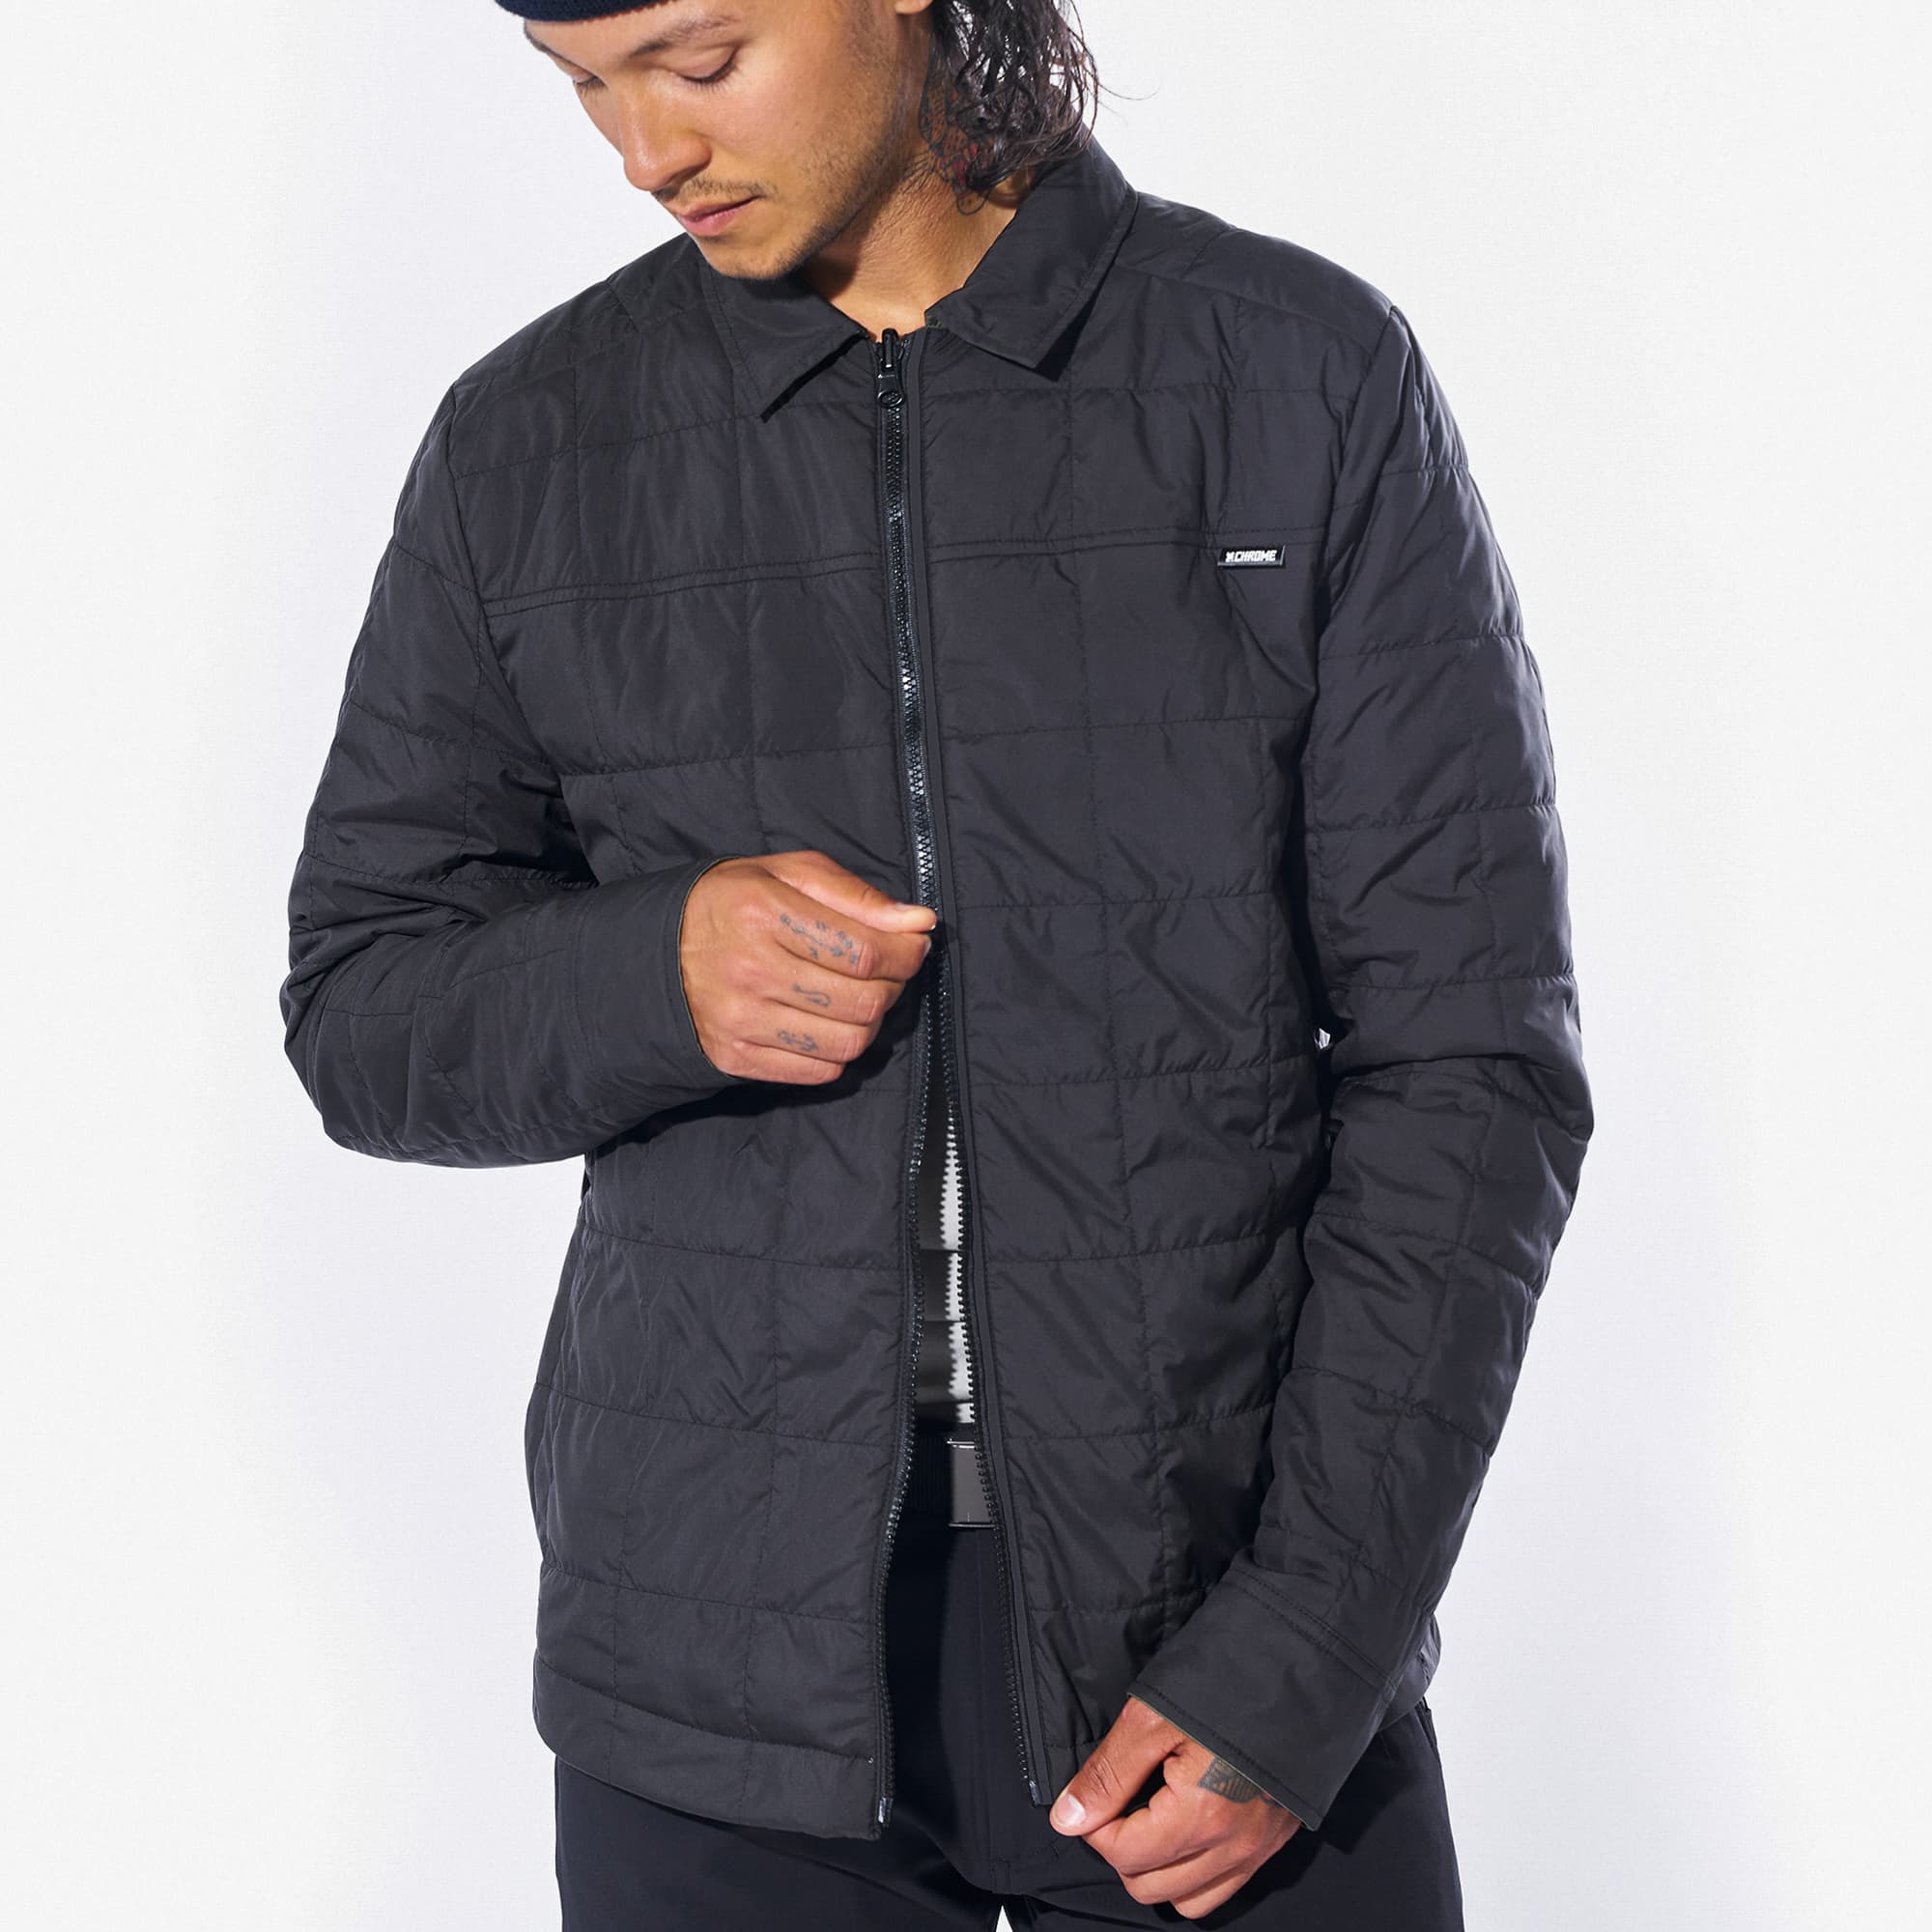 Two way zip Shirt Jacket in black with green on a man